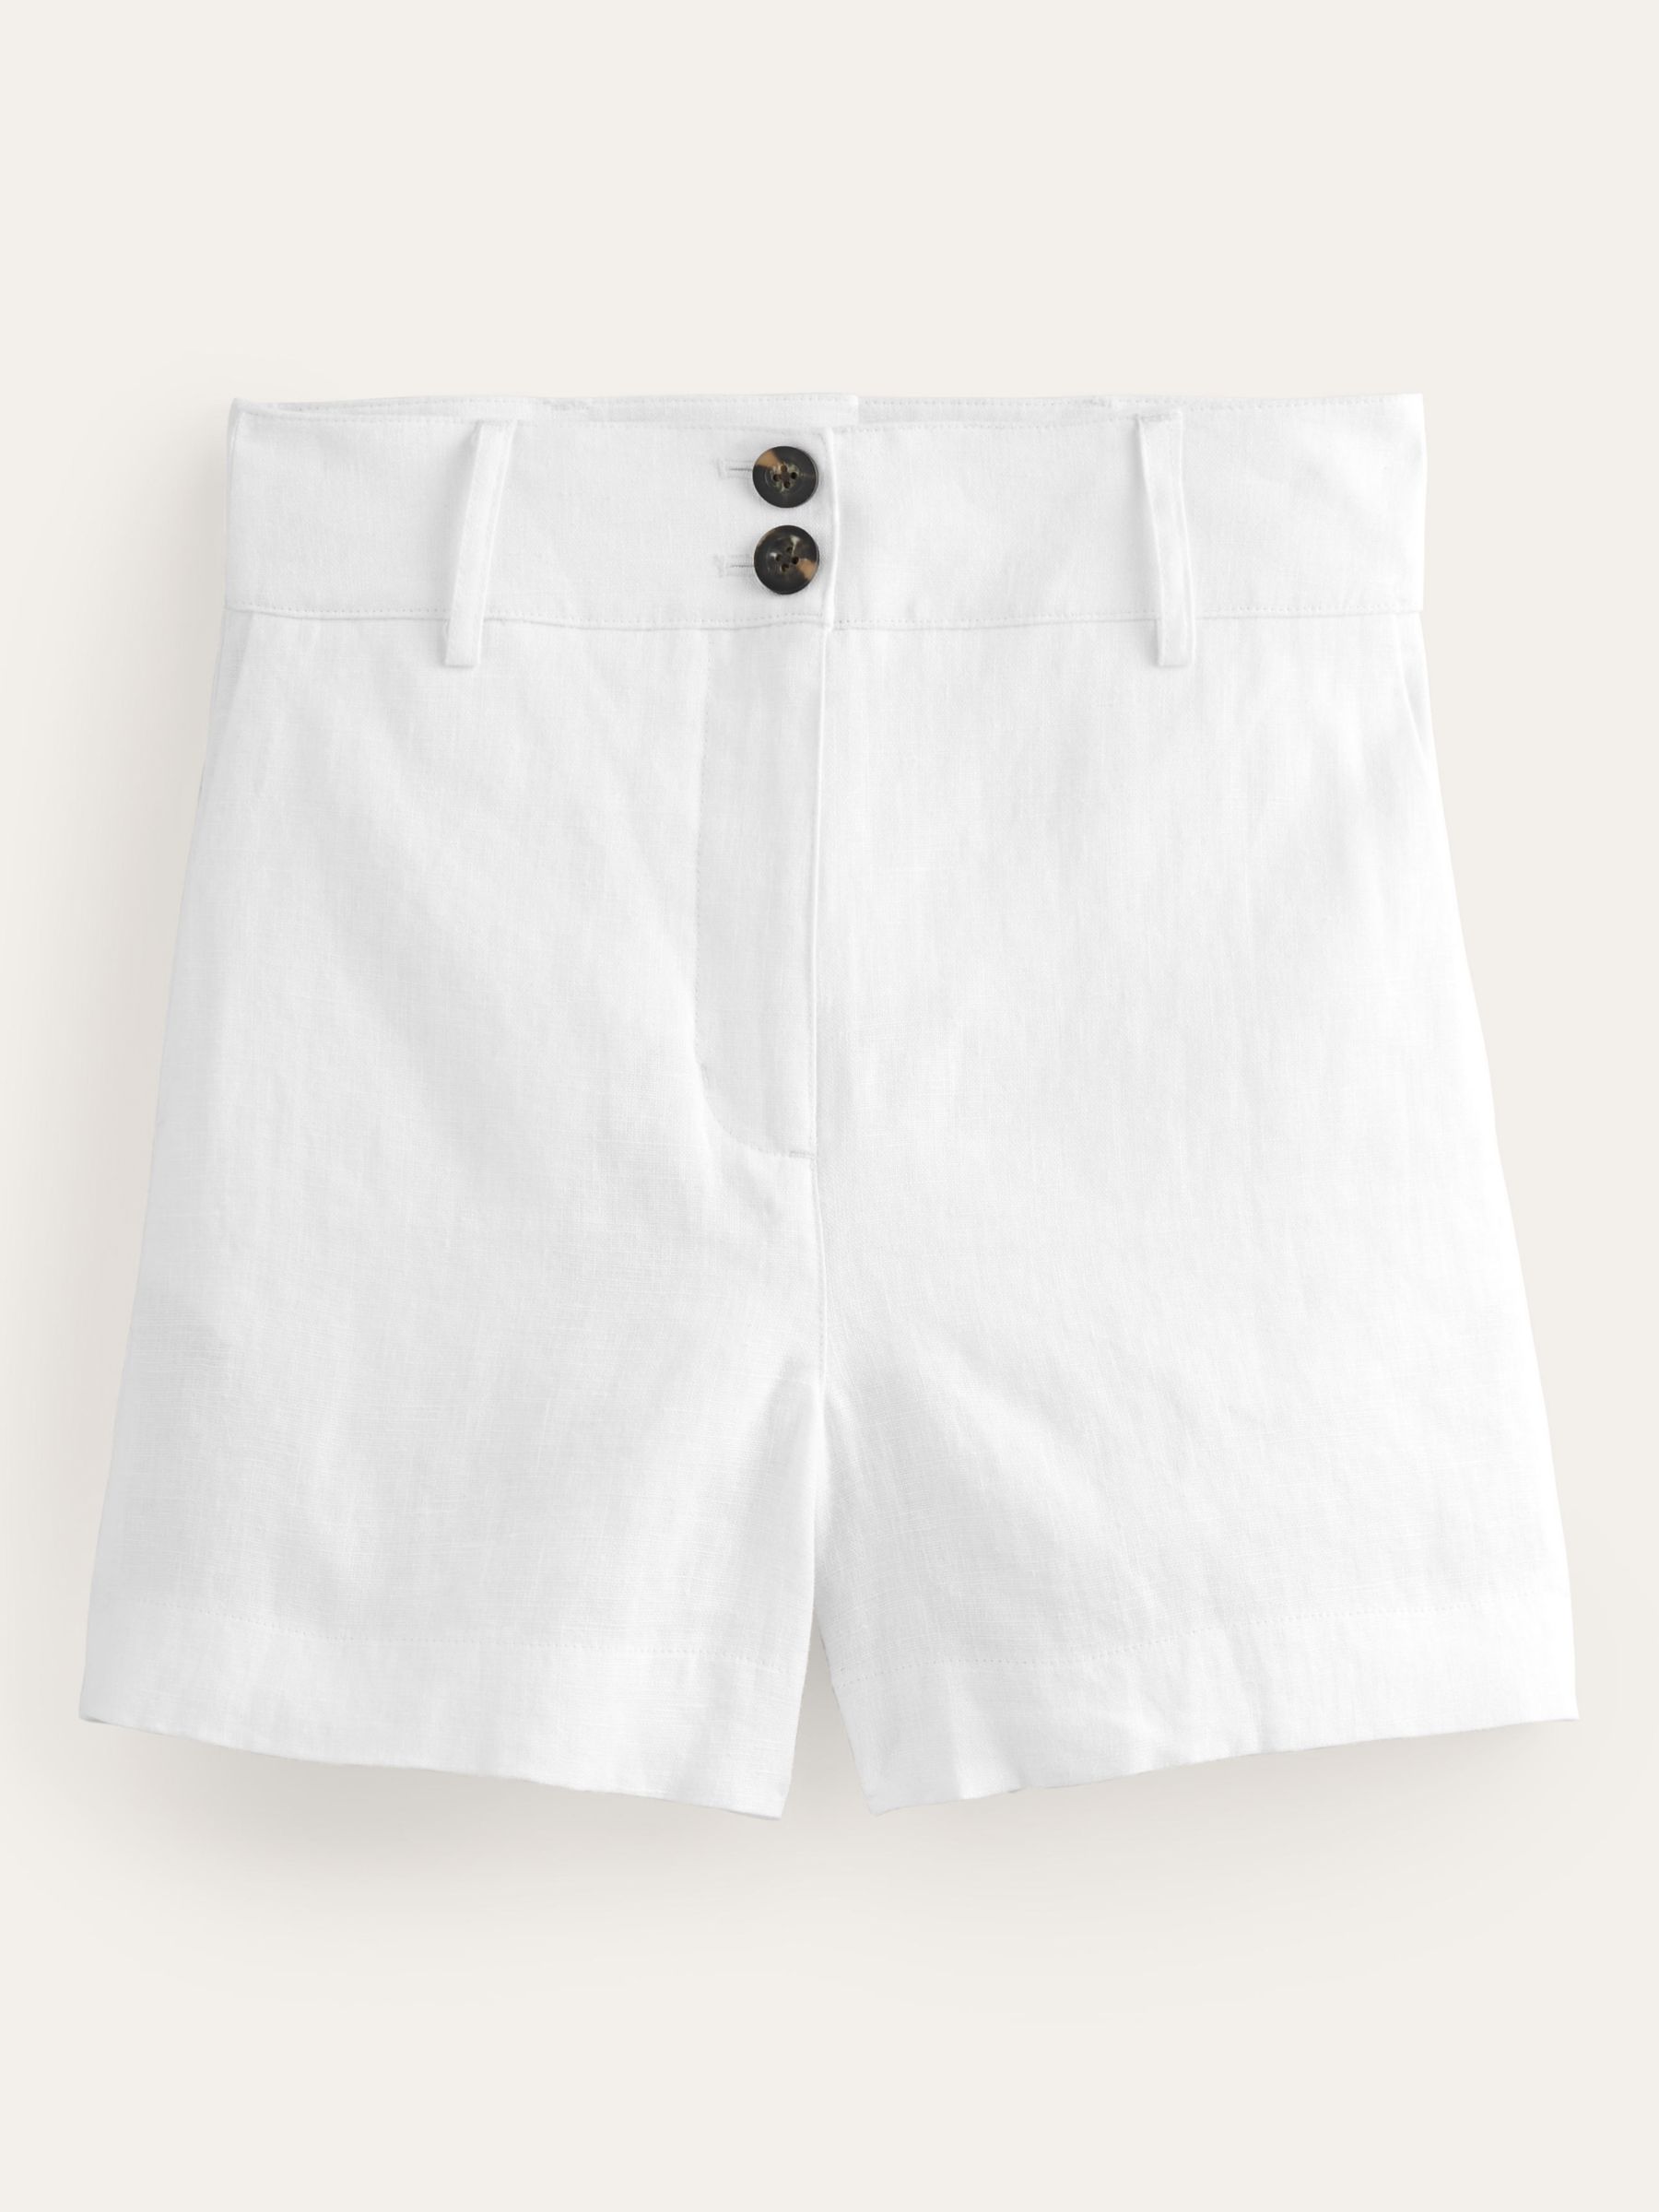 Boden Westbourne Linen Shorts, White at John Lewis & Partners